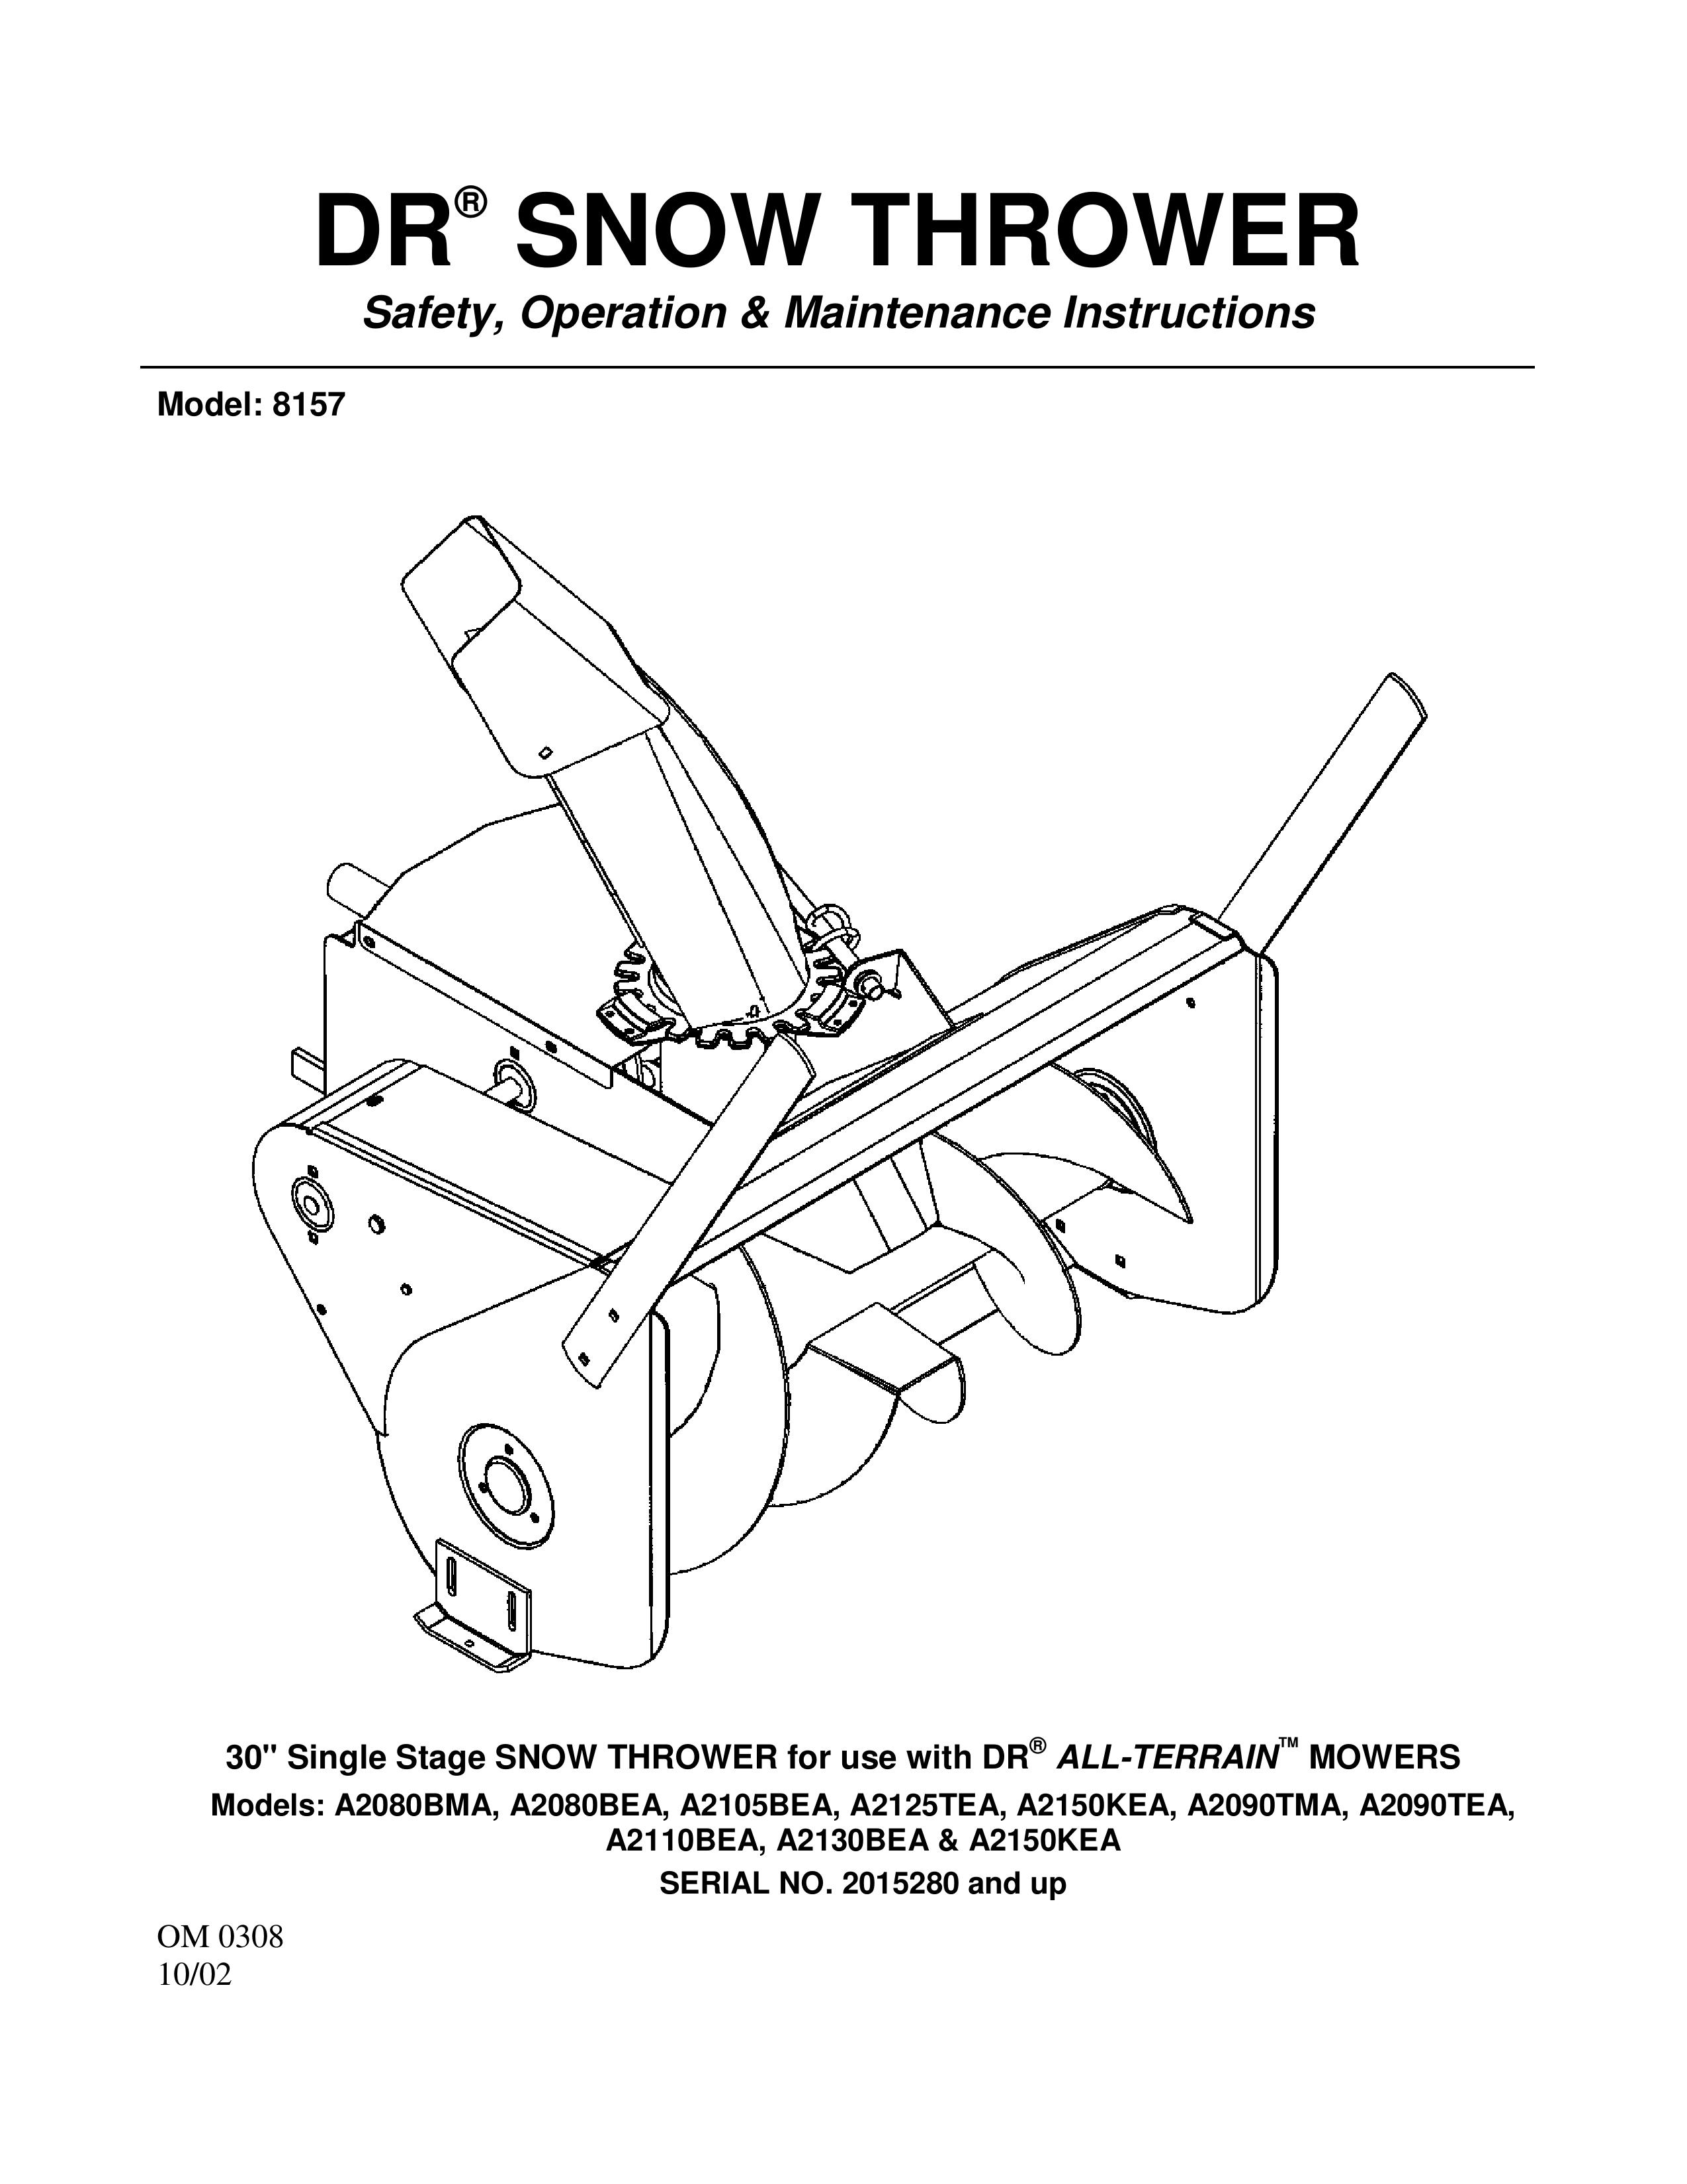 Country Home Products A2090TEA Snow Blower User Manual